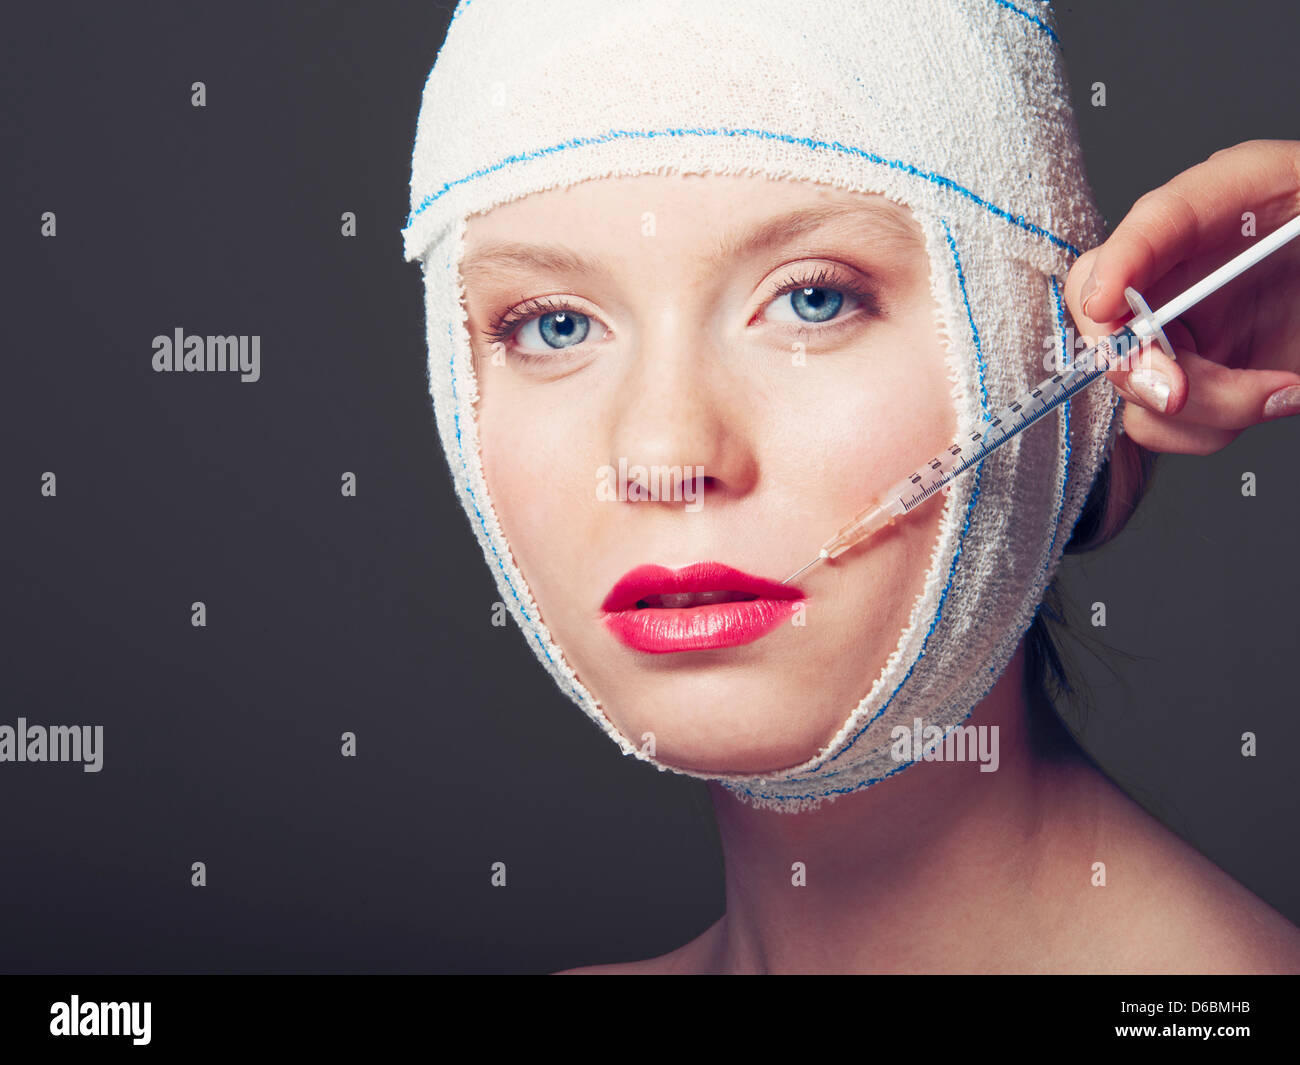 Woman in bandages having injection Stock Photo